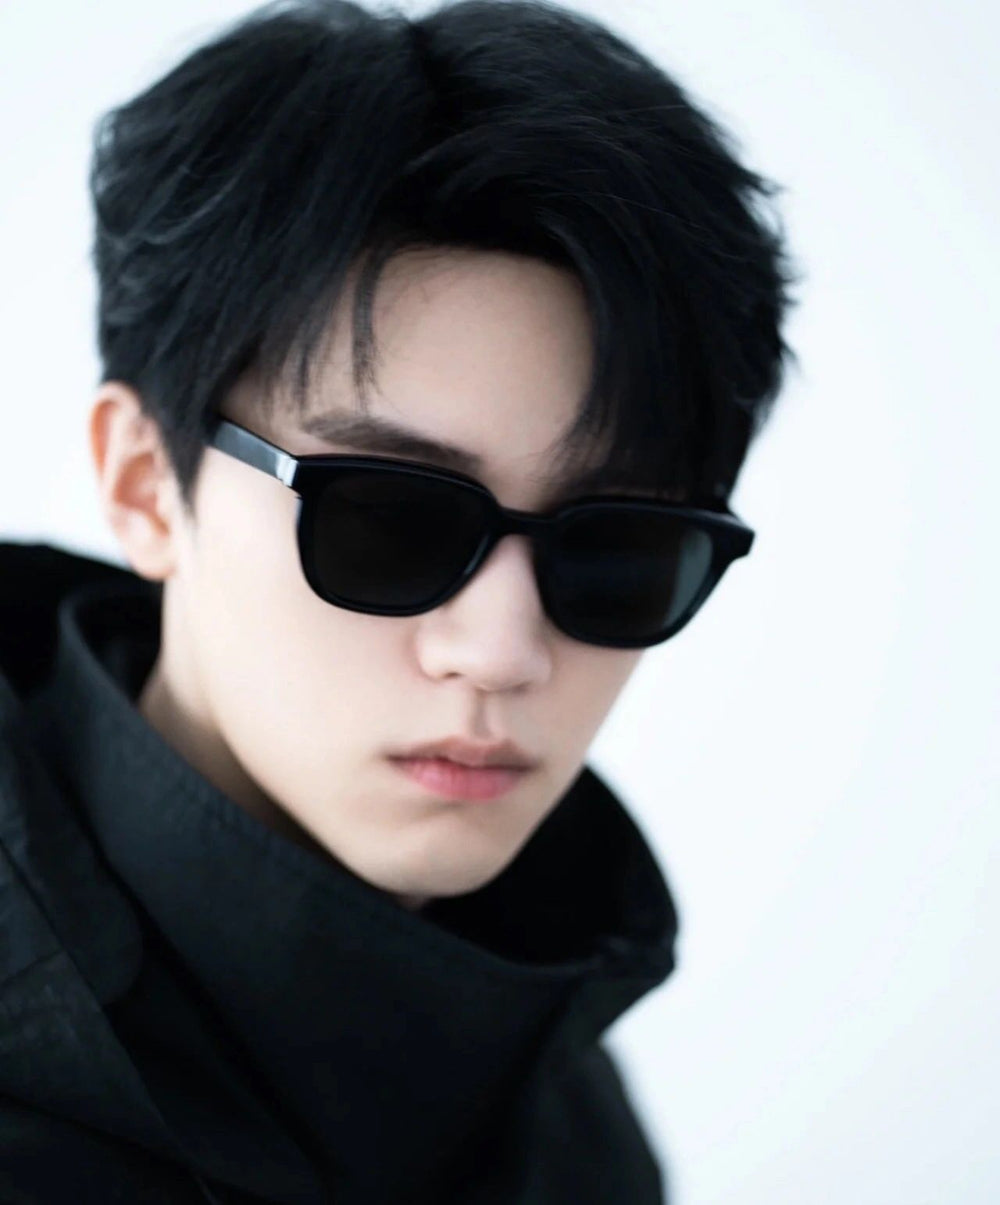 A trendy guy rocks sunglasses and a black jacket, adding a touch of mystery to his look.